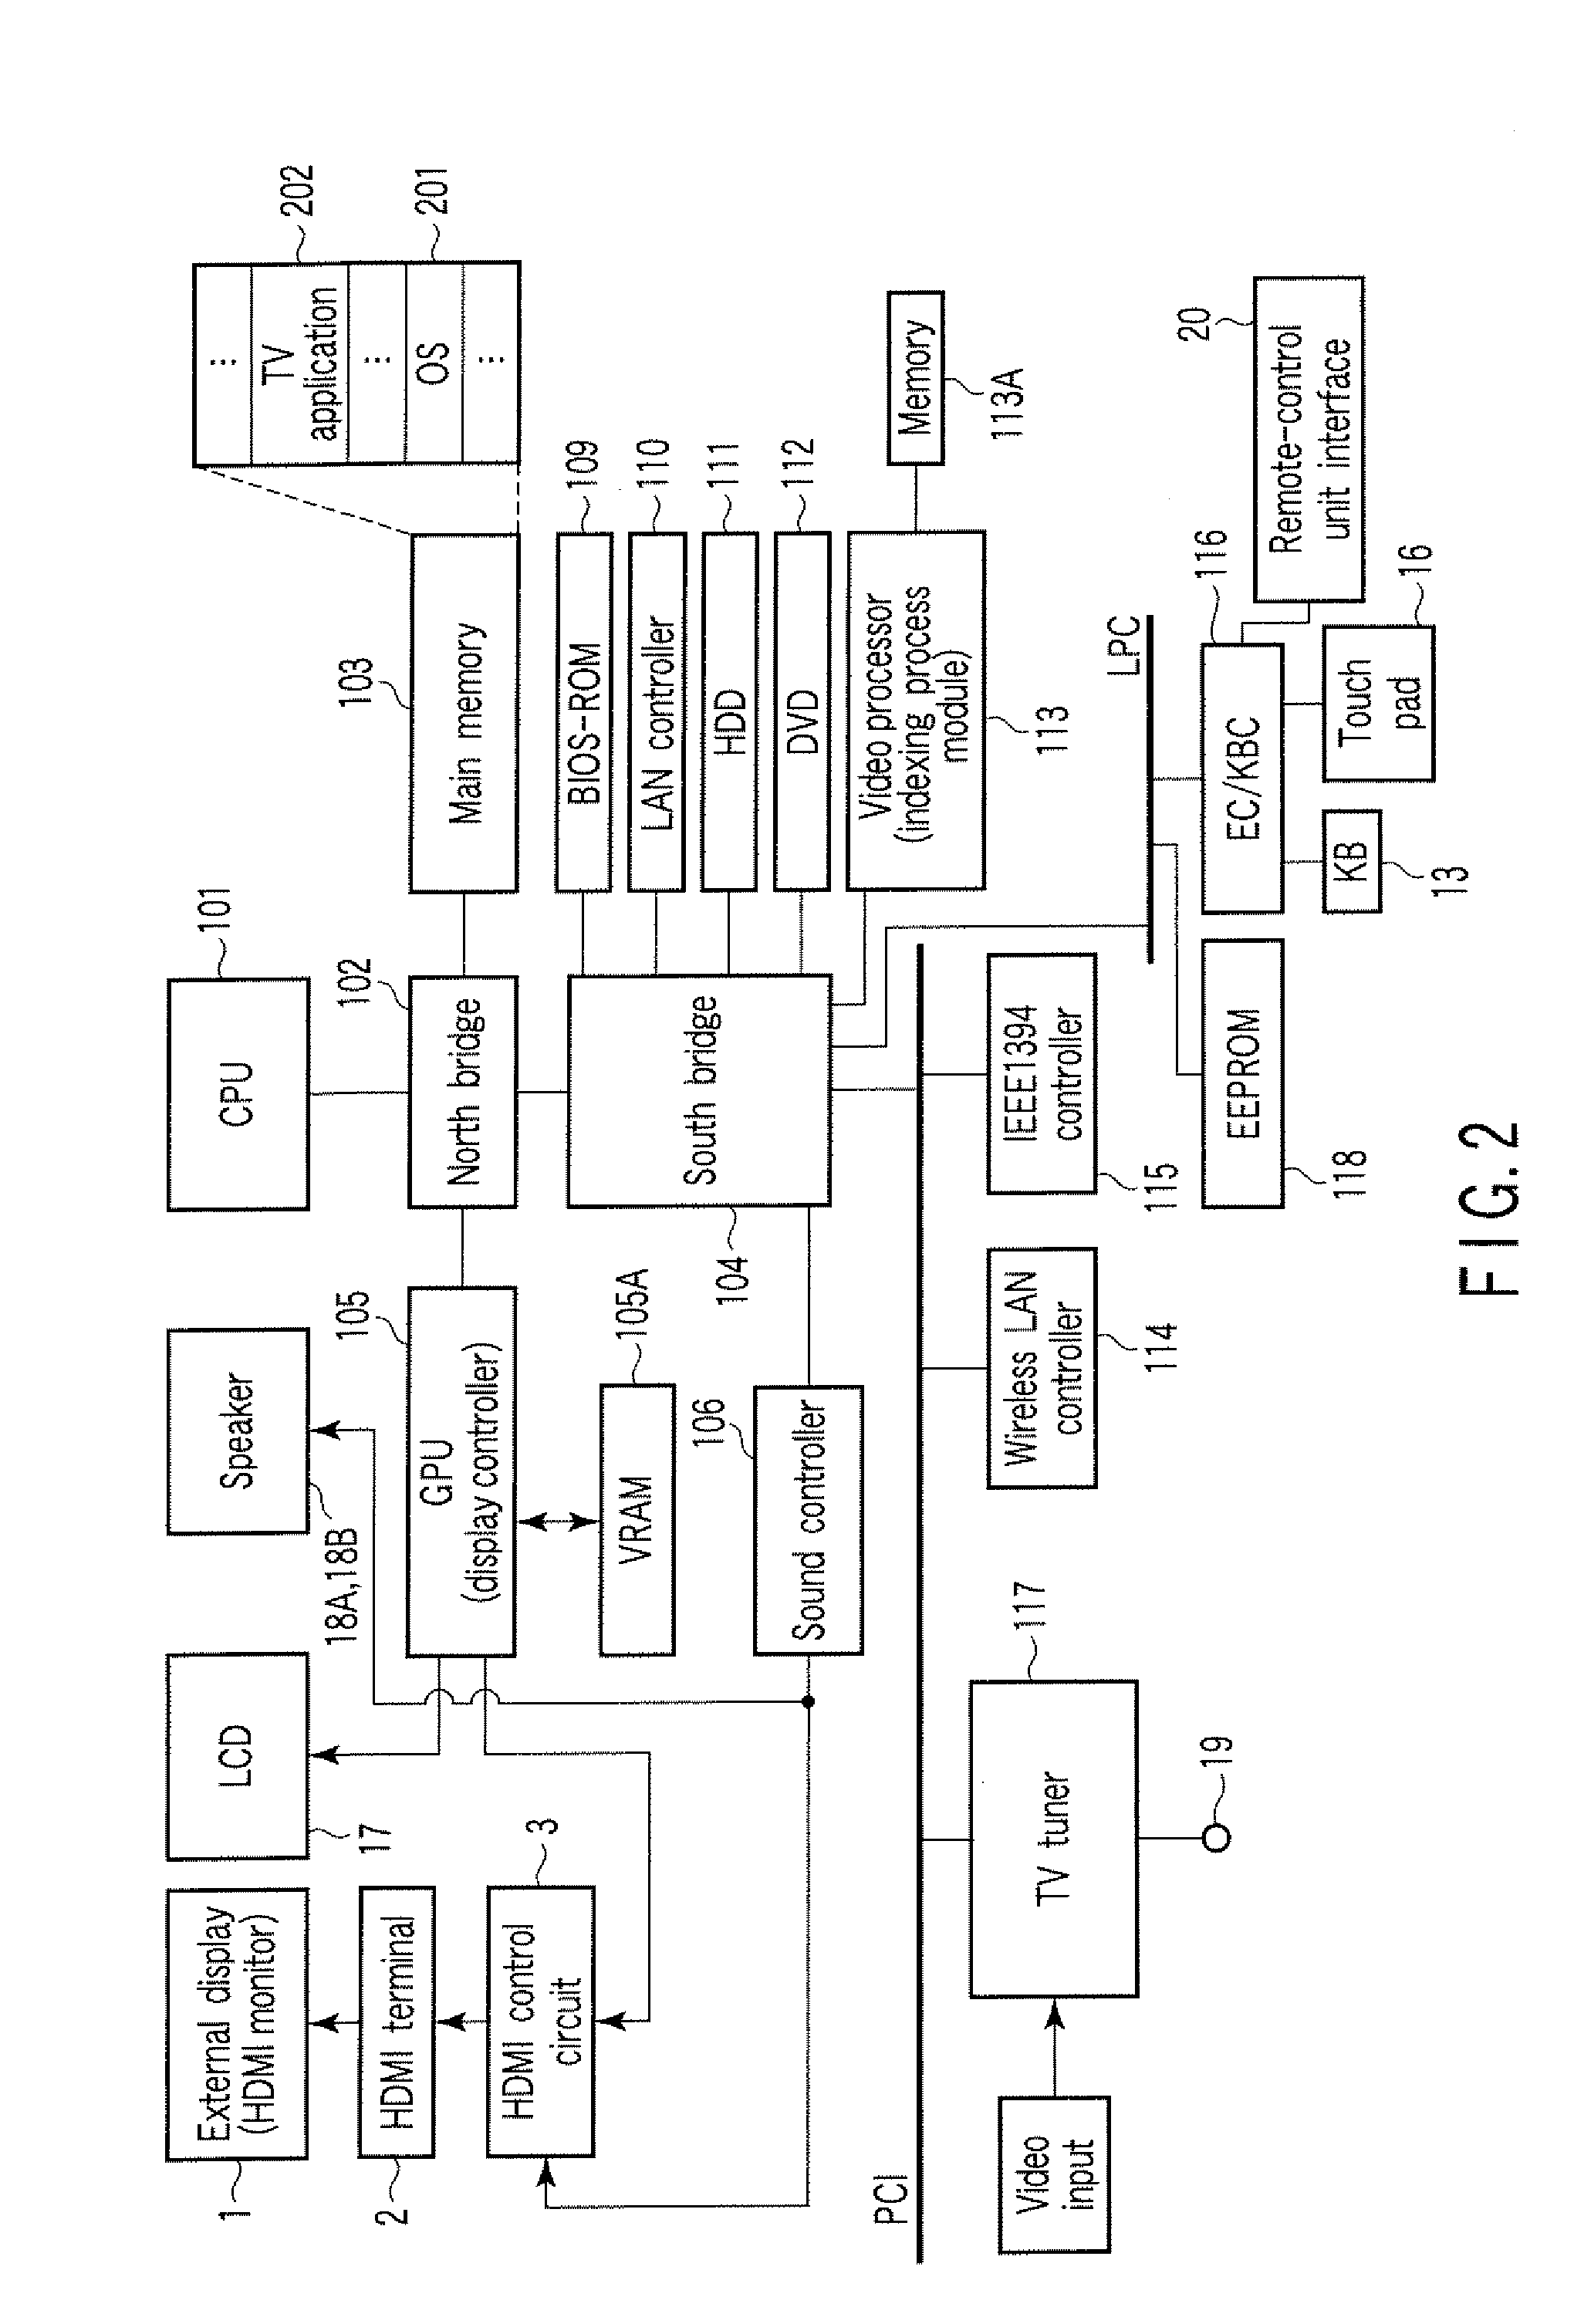 Electronic apparatus and display process method